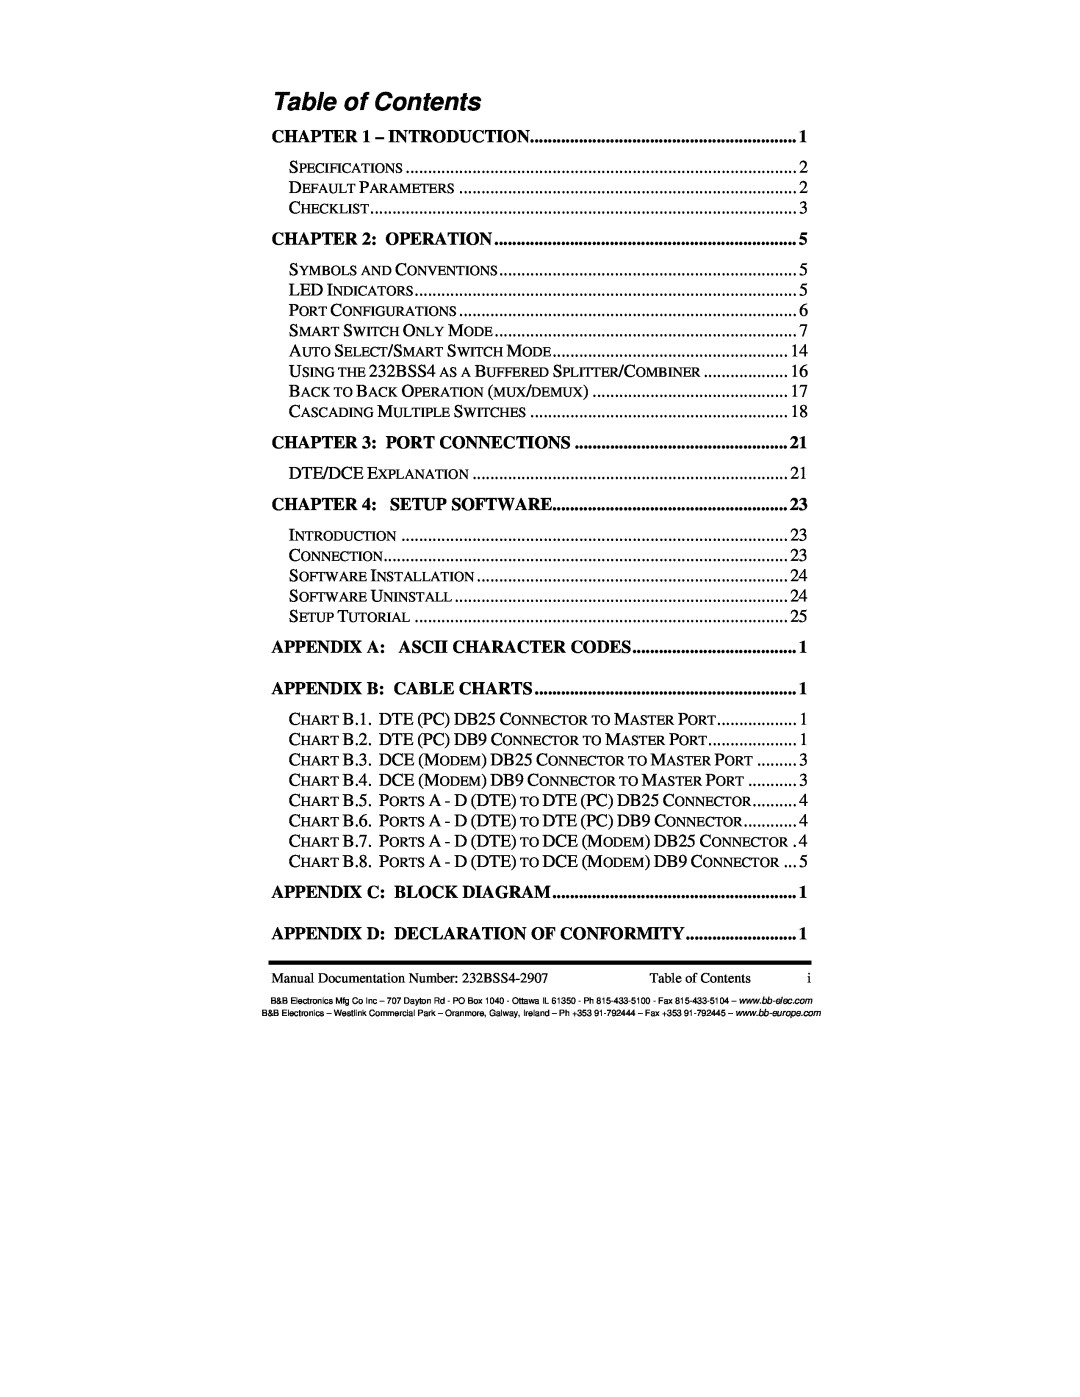 B&B Electronics 232BSS4 manual Table of Contents, Introduction, Operation, Port Connections, Setup Software 